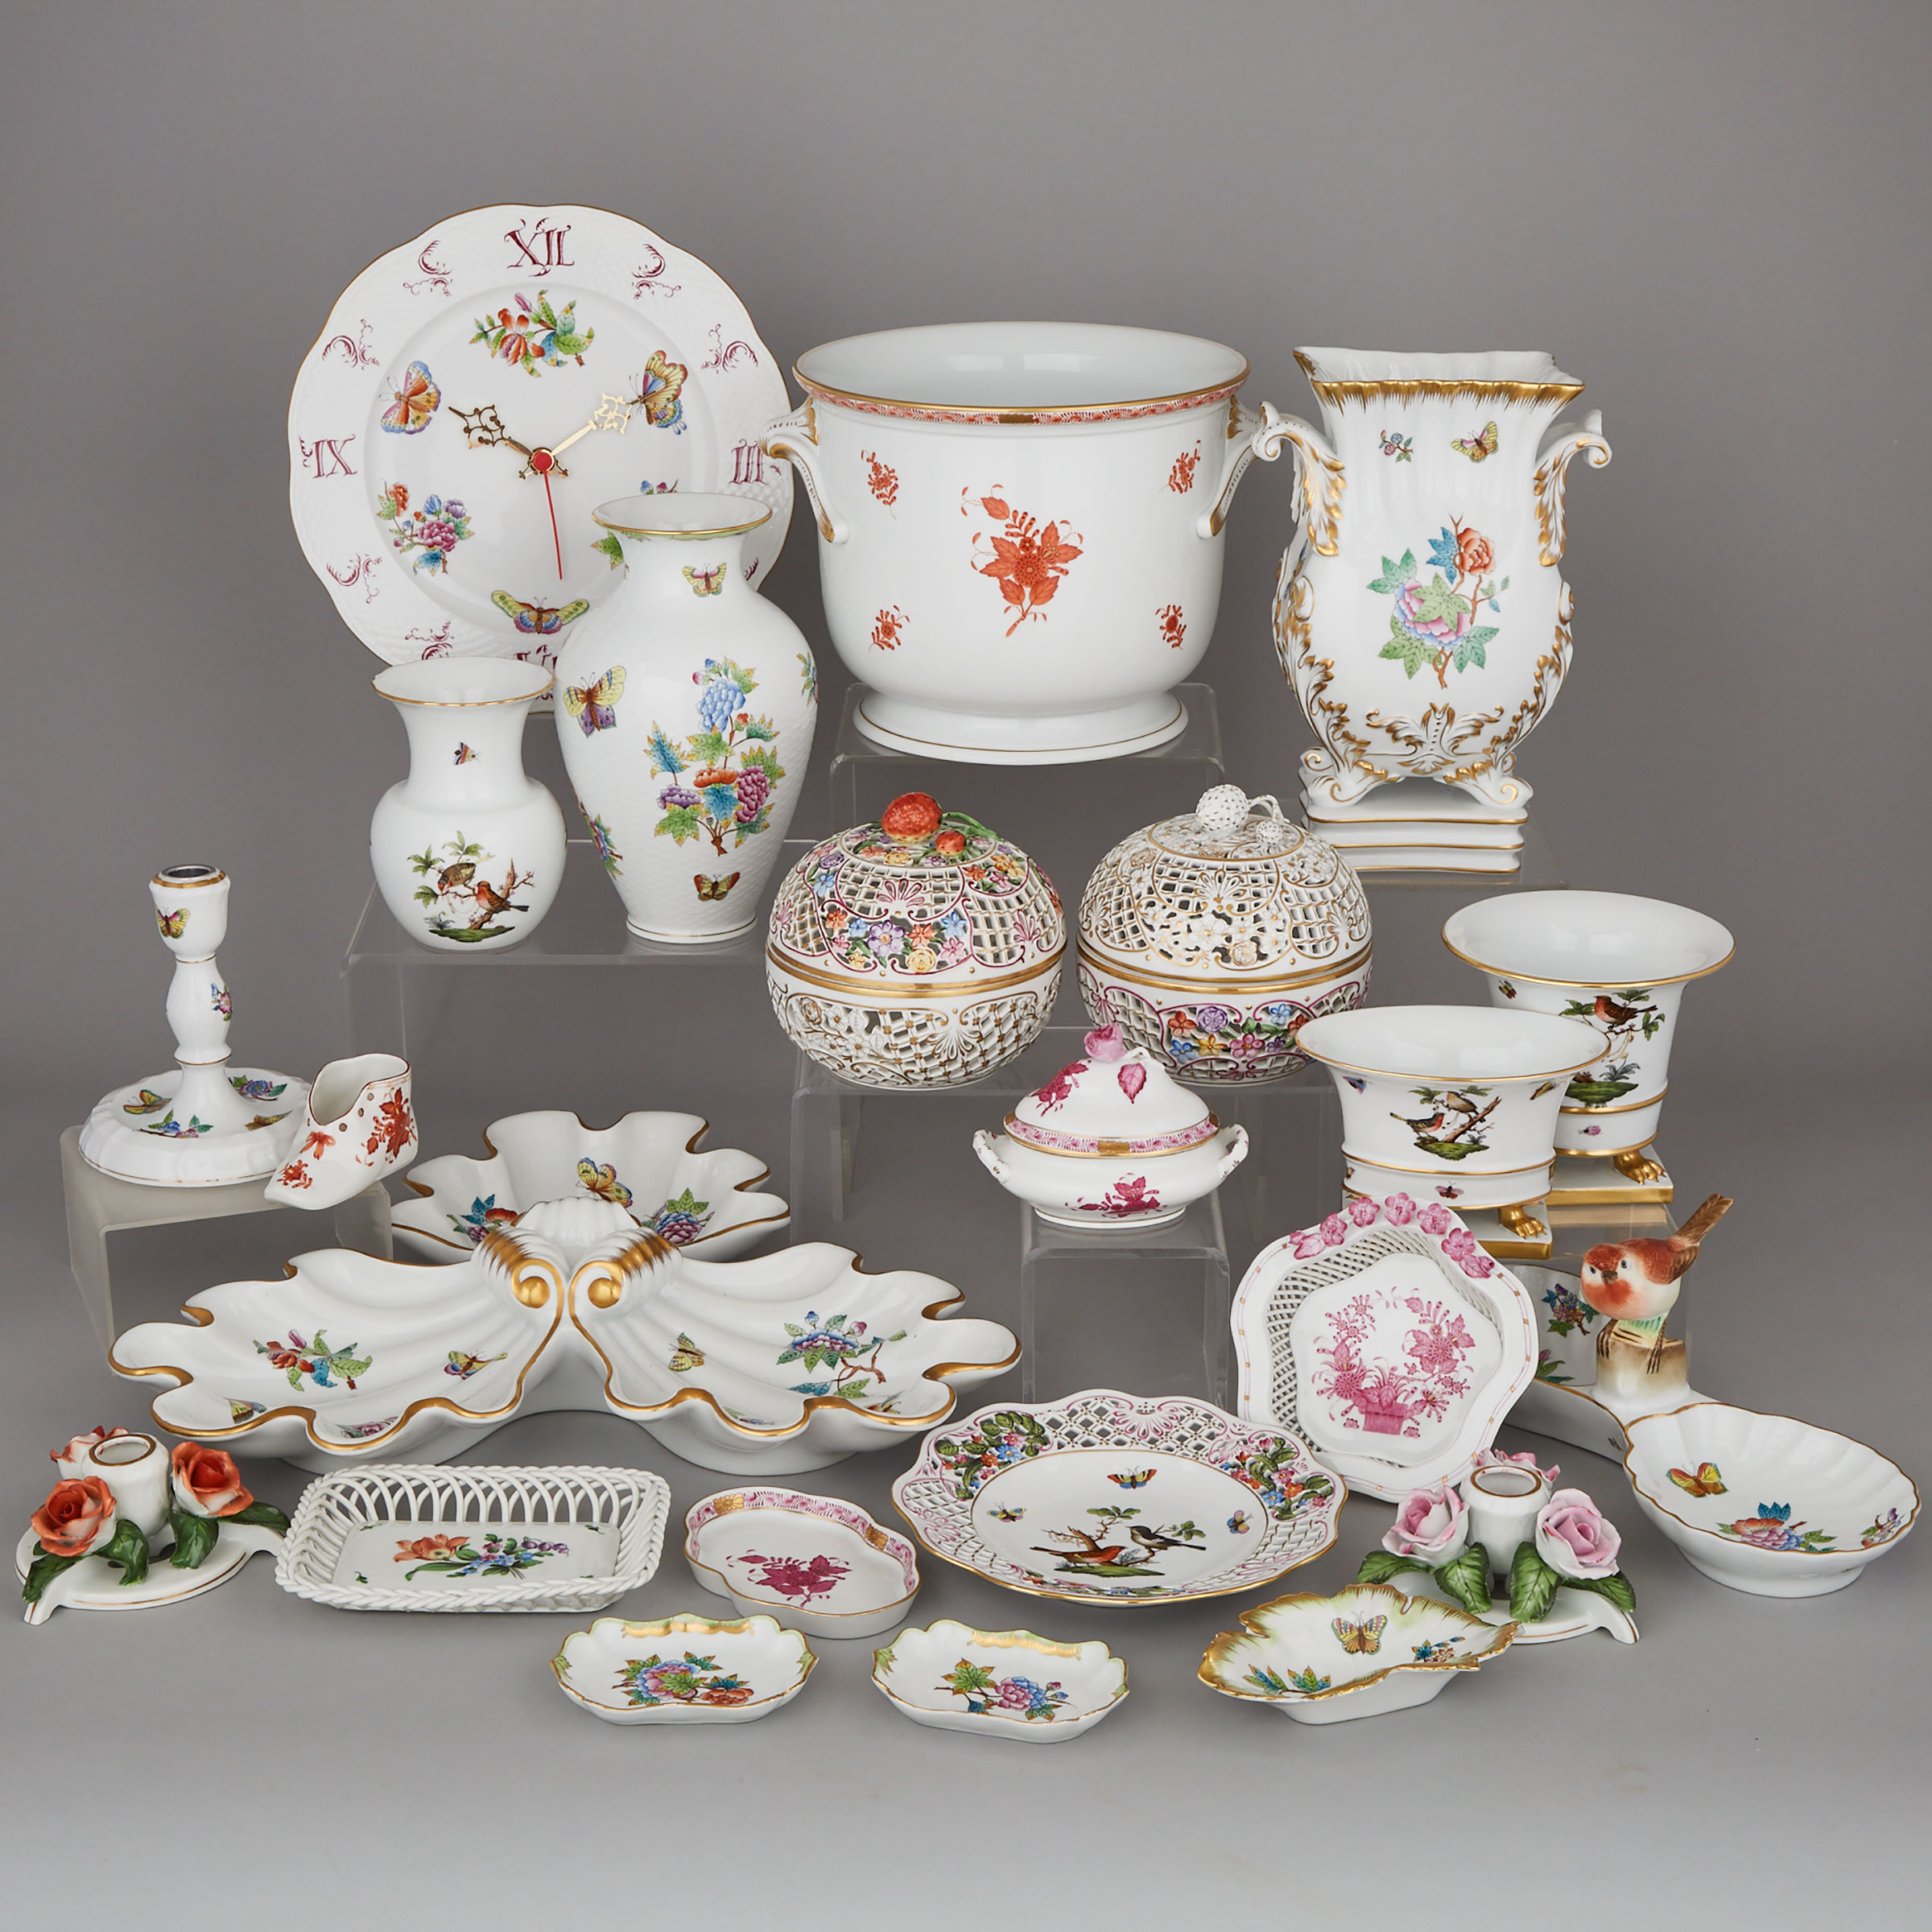 Group of Herend Porcelain, 20th century